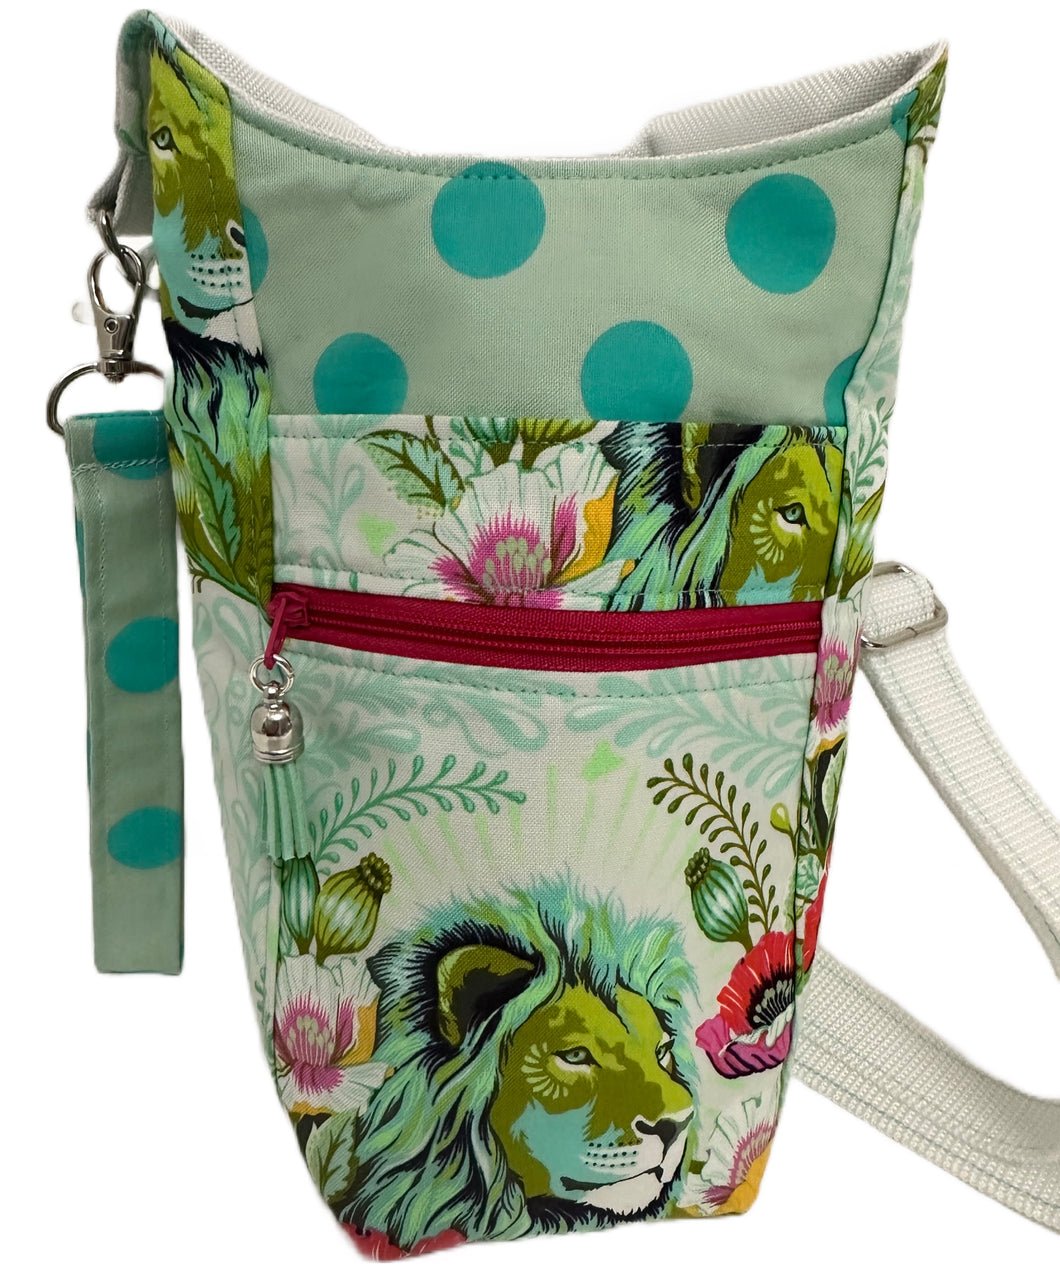 Lions: Crossbody Water Bottle Bag w/Cell Phone Pouch, Zipper Pocket and Key Fob